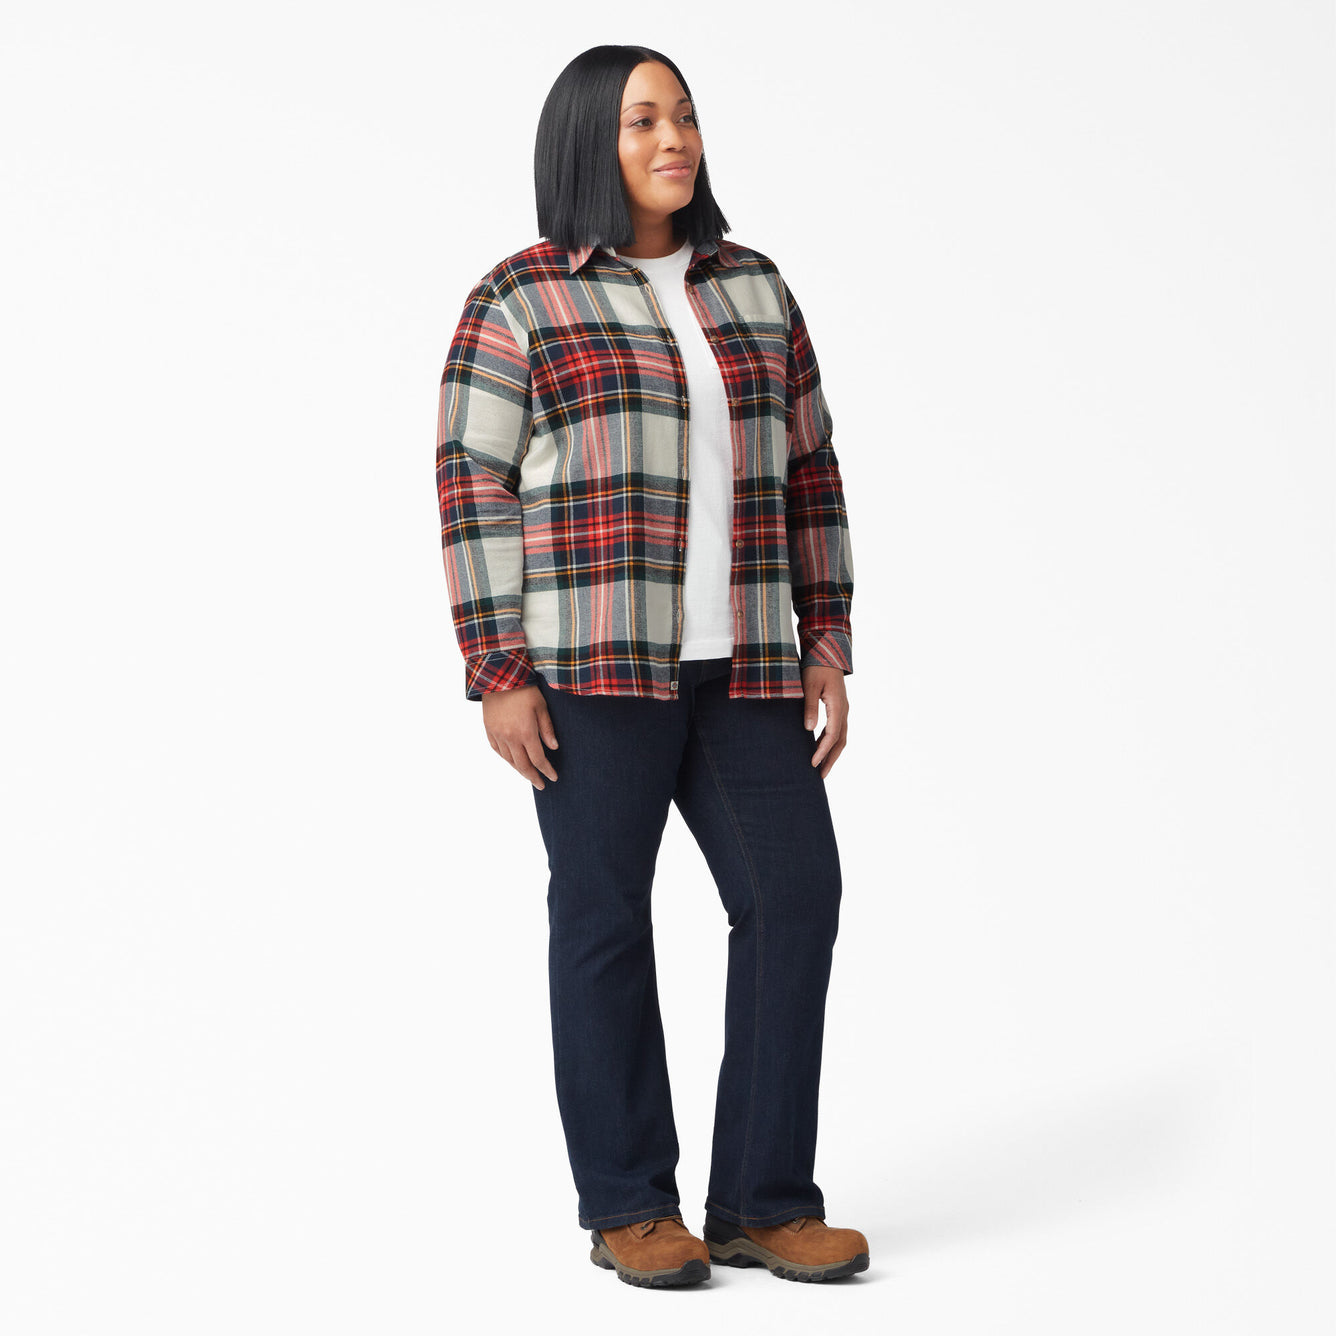 Dickies  -  #FLW075 - Made to Fit the Curvy Girl - Women's Plus Size Long Sleeve Plaid Flannel Work Shirt